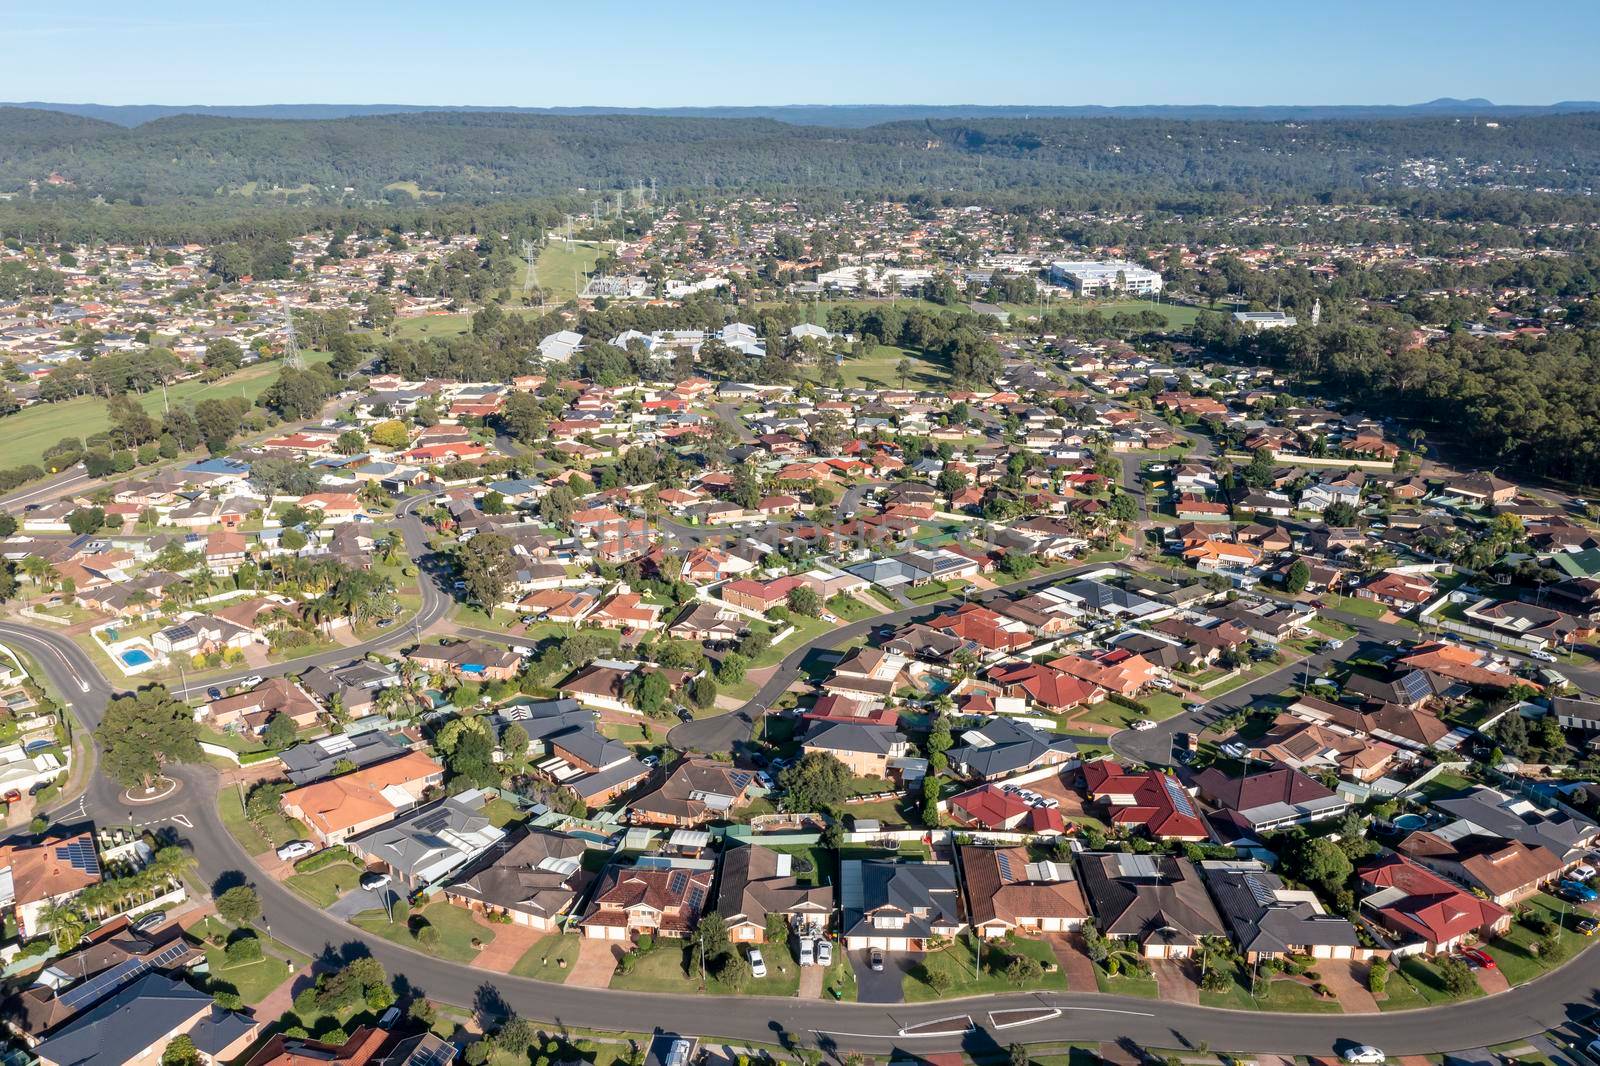 Aerial view of the suburb of Glenmore Park in greater Sydney in Australia by WittkePhotos